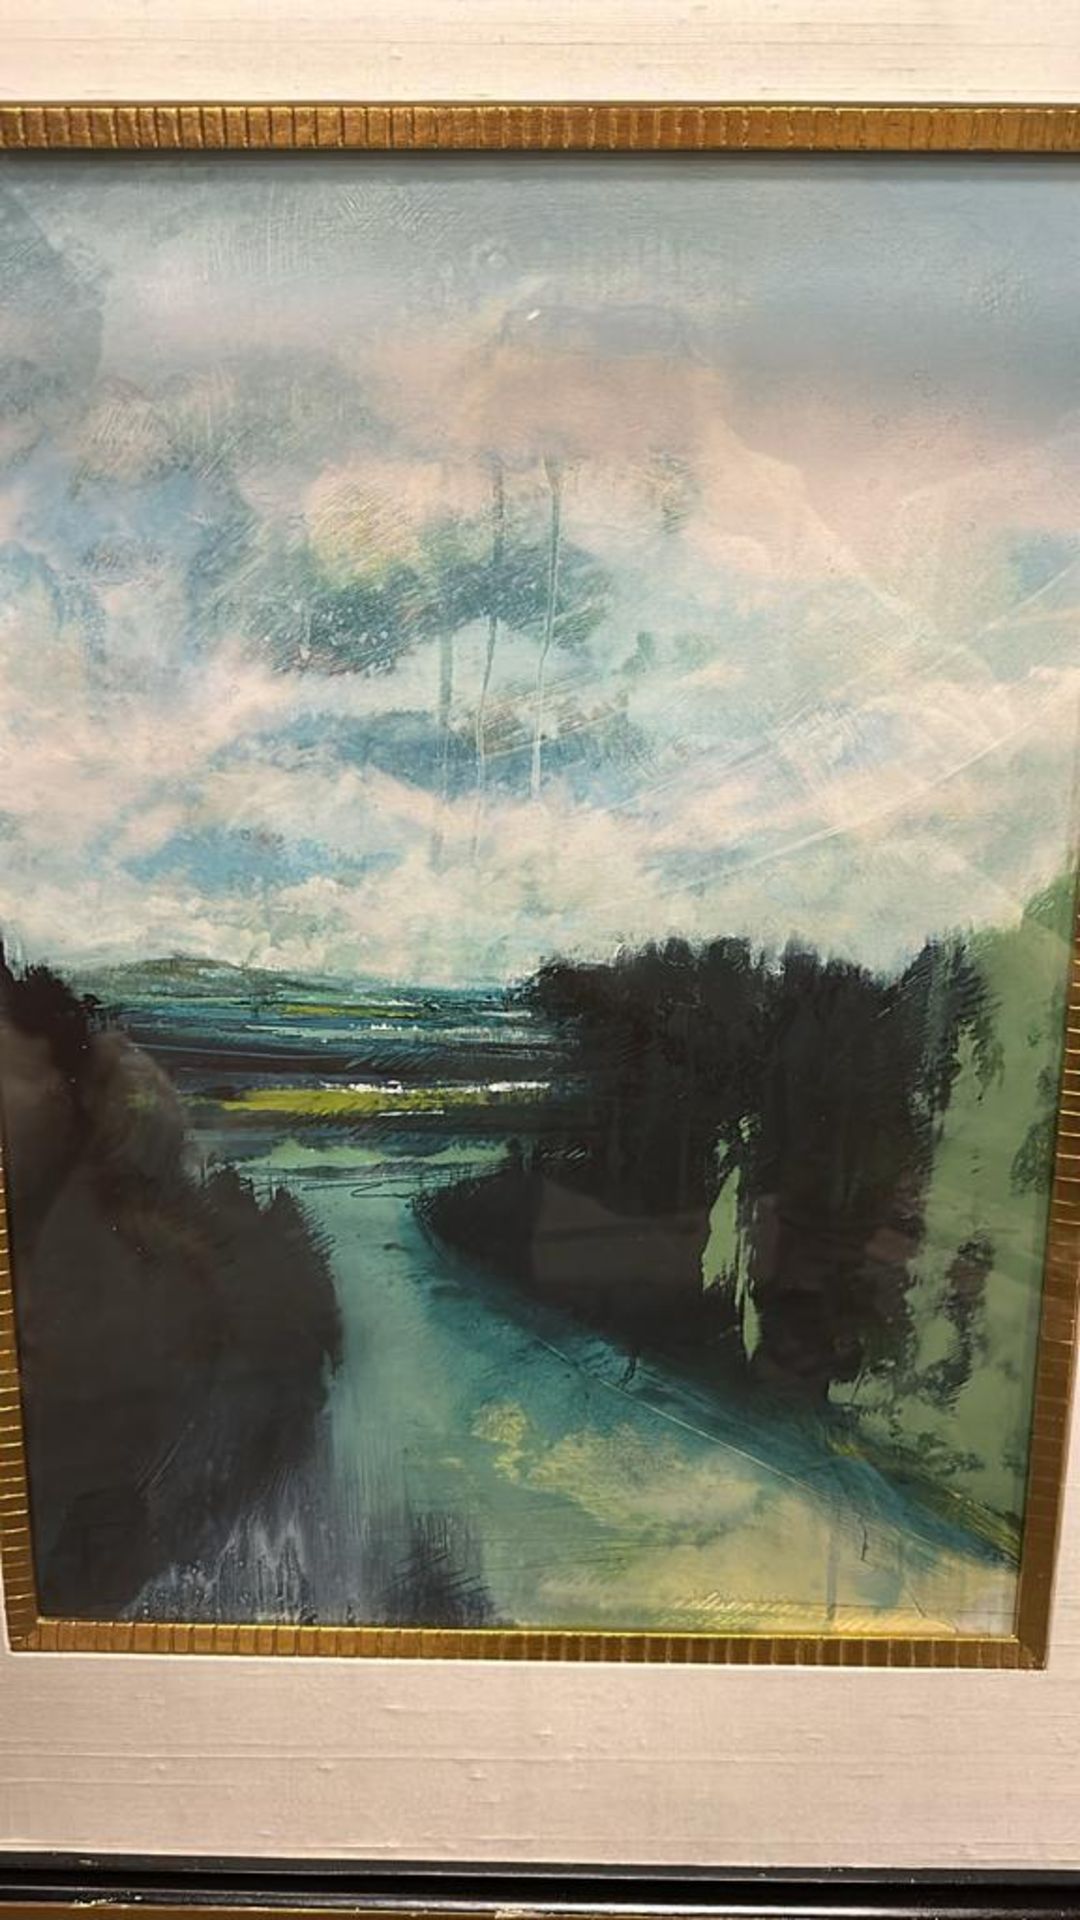 Landscape Print Of A River With Trees In The Foreground And A Mountain Range In The Background - Image 2 of 2